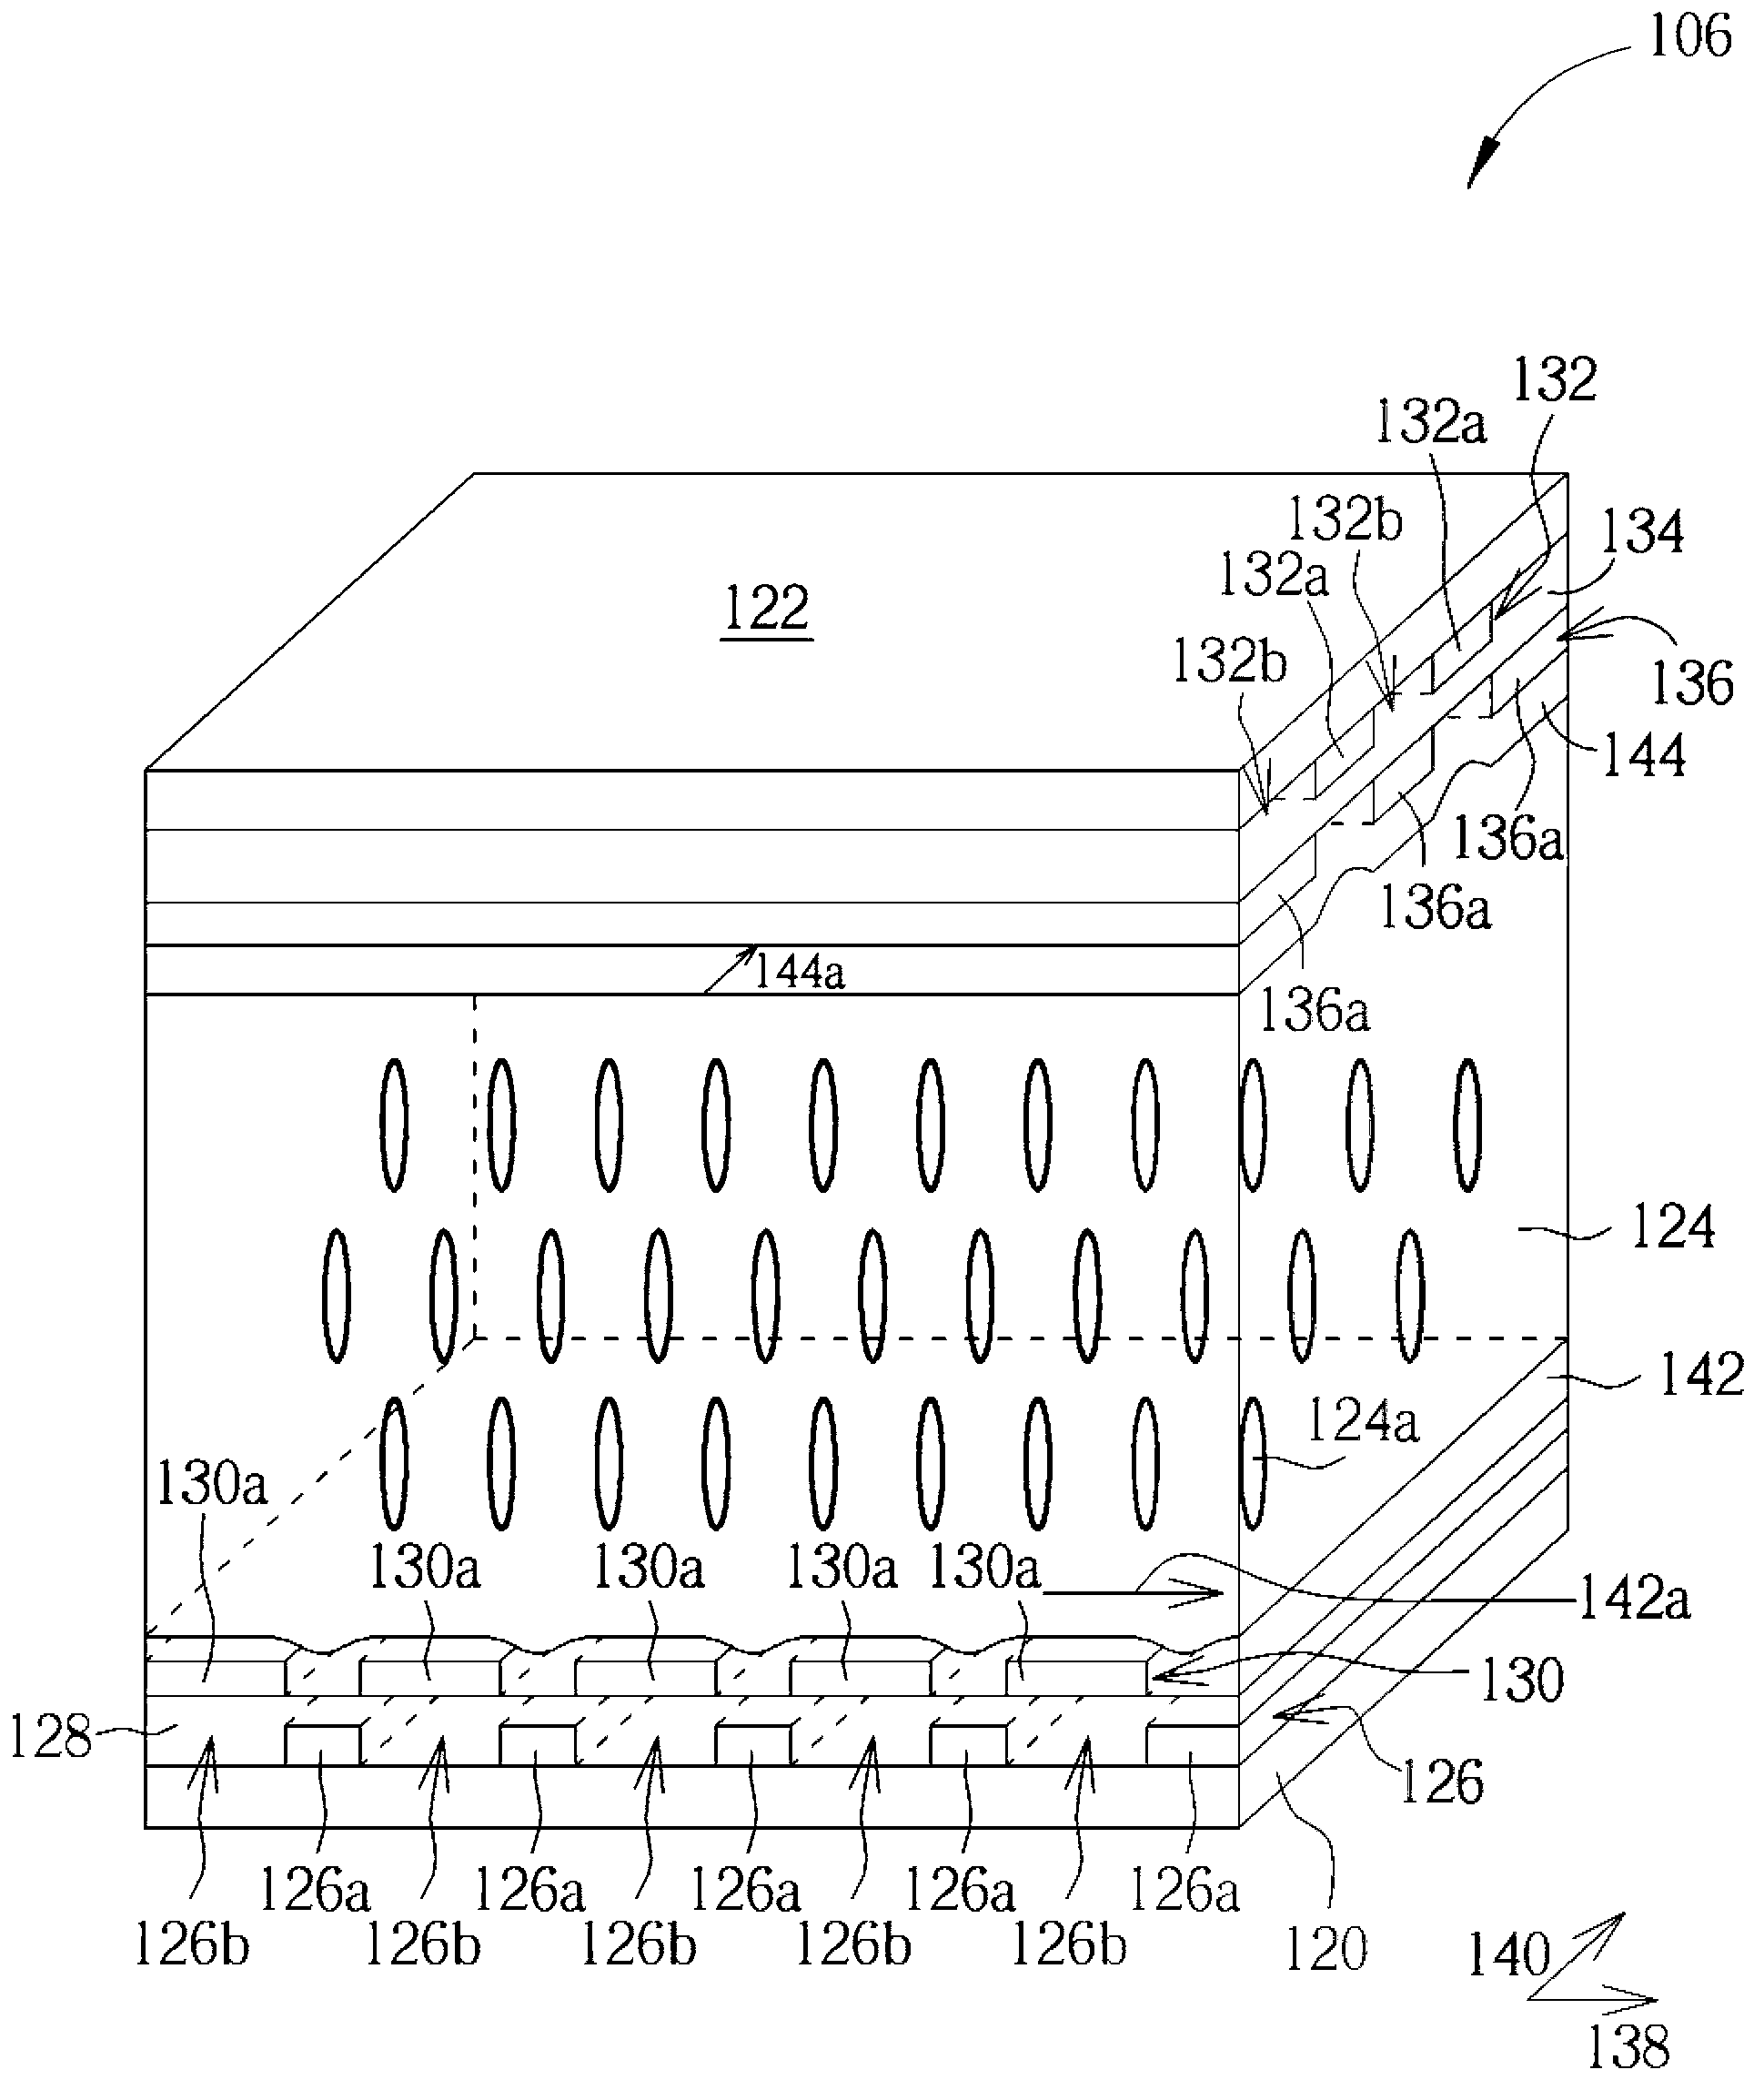 A three-dimensional display device capable of displaying two-dimensional and three-dimensional frames